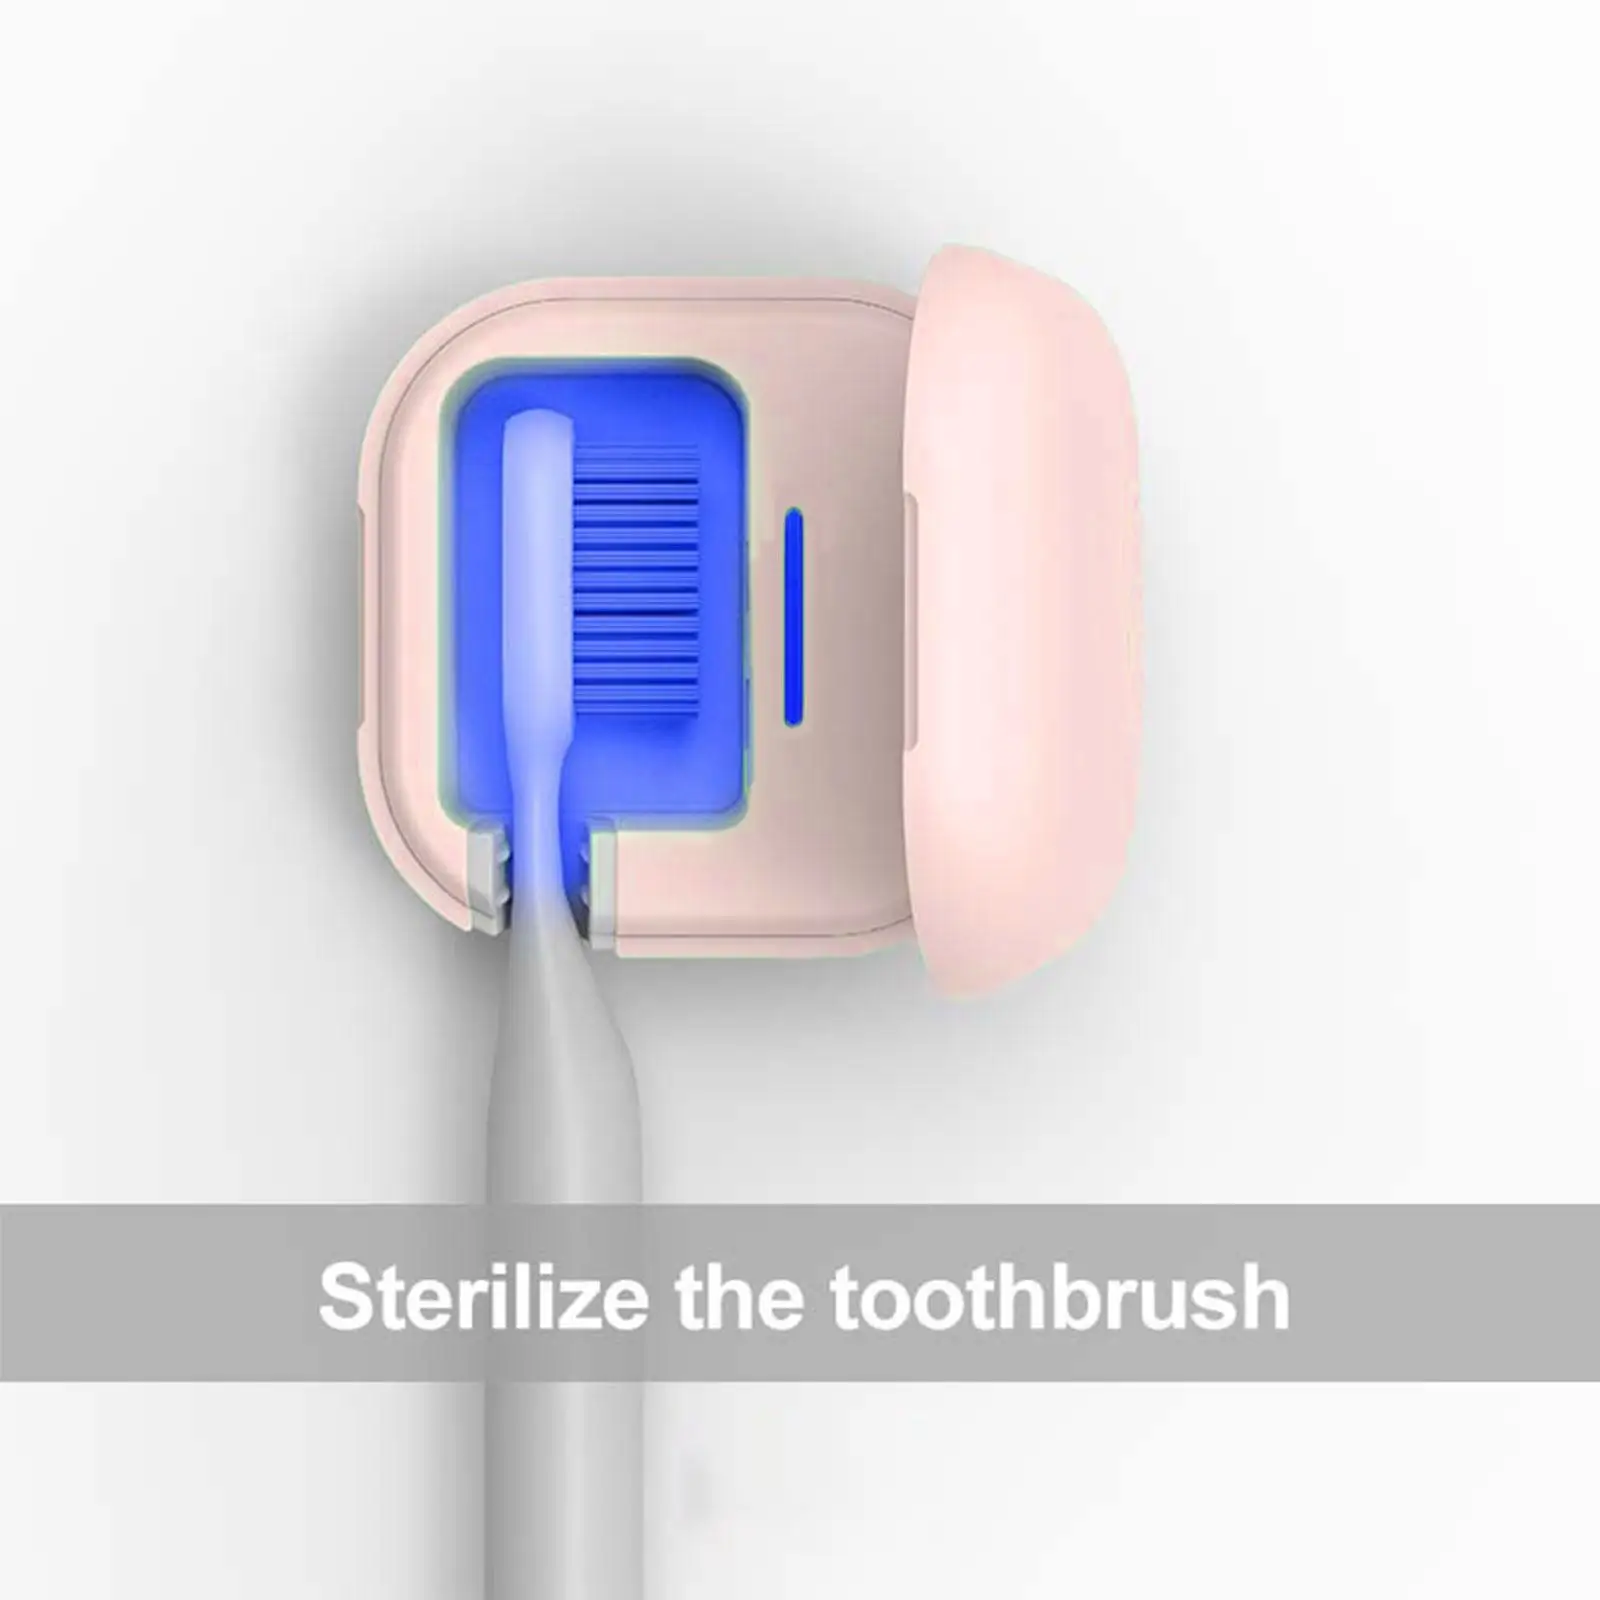 Toothbrush  Case Lamp   Safety Mini Toothbrush Holder Cover for Houshold All Toothbrushes Jewelry